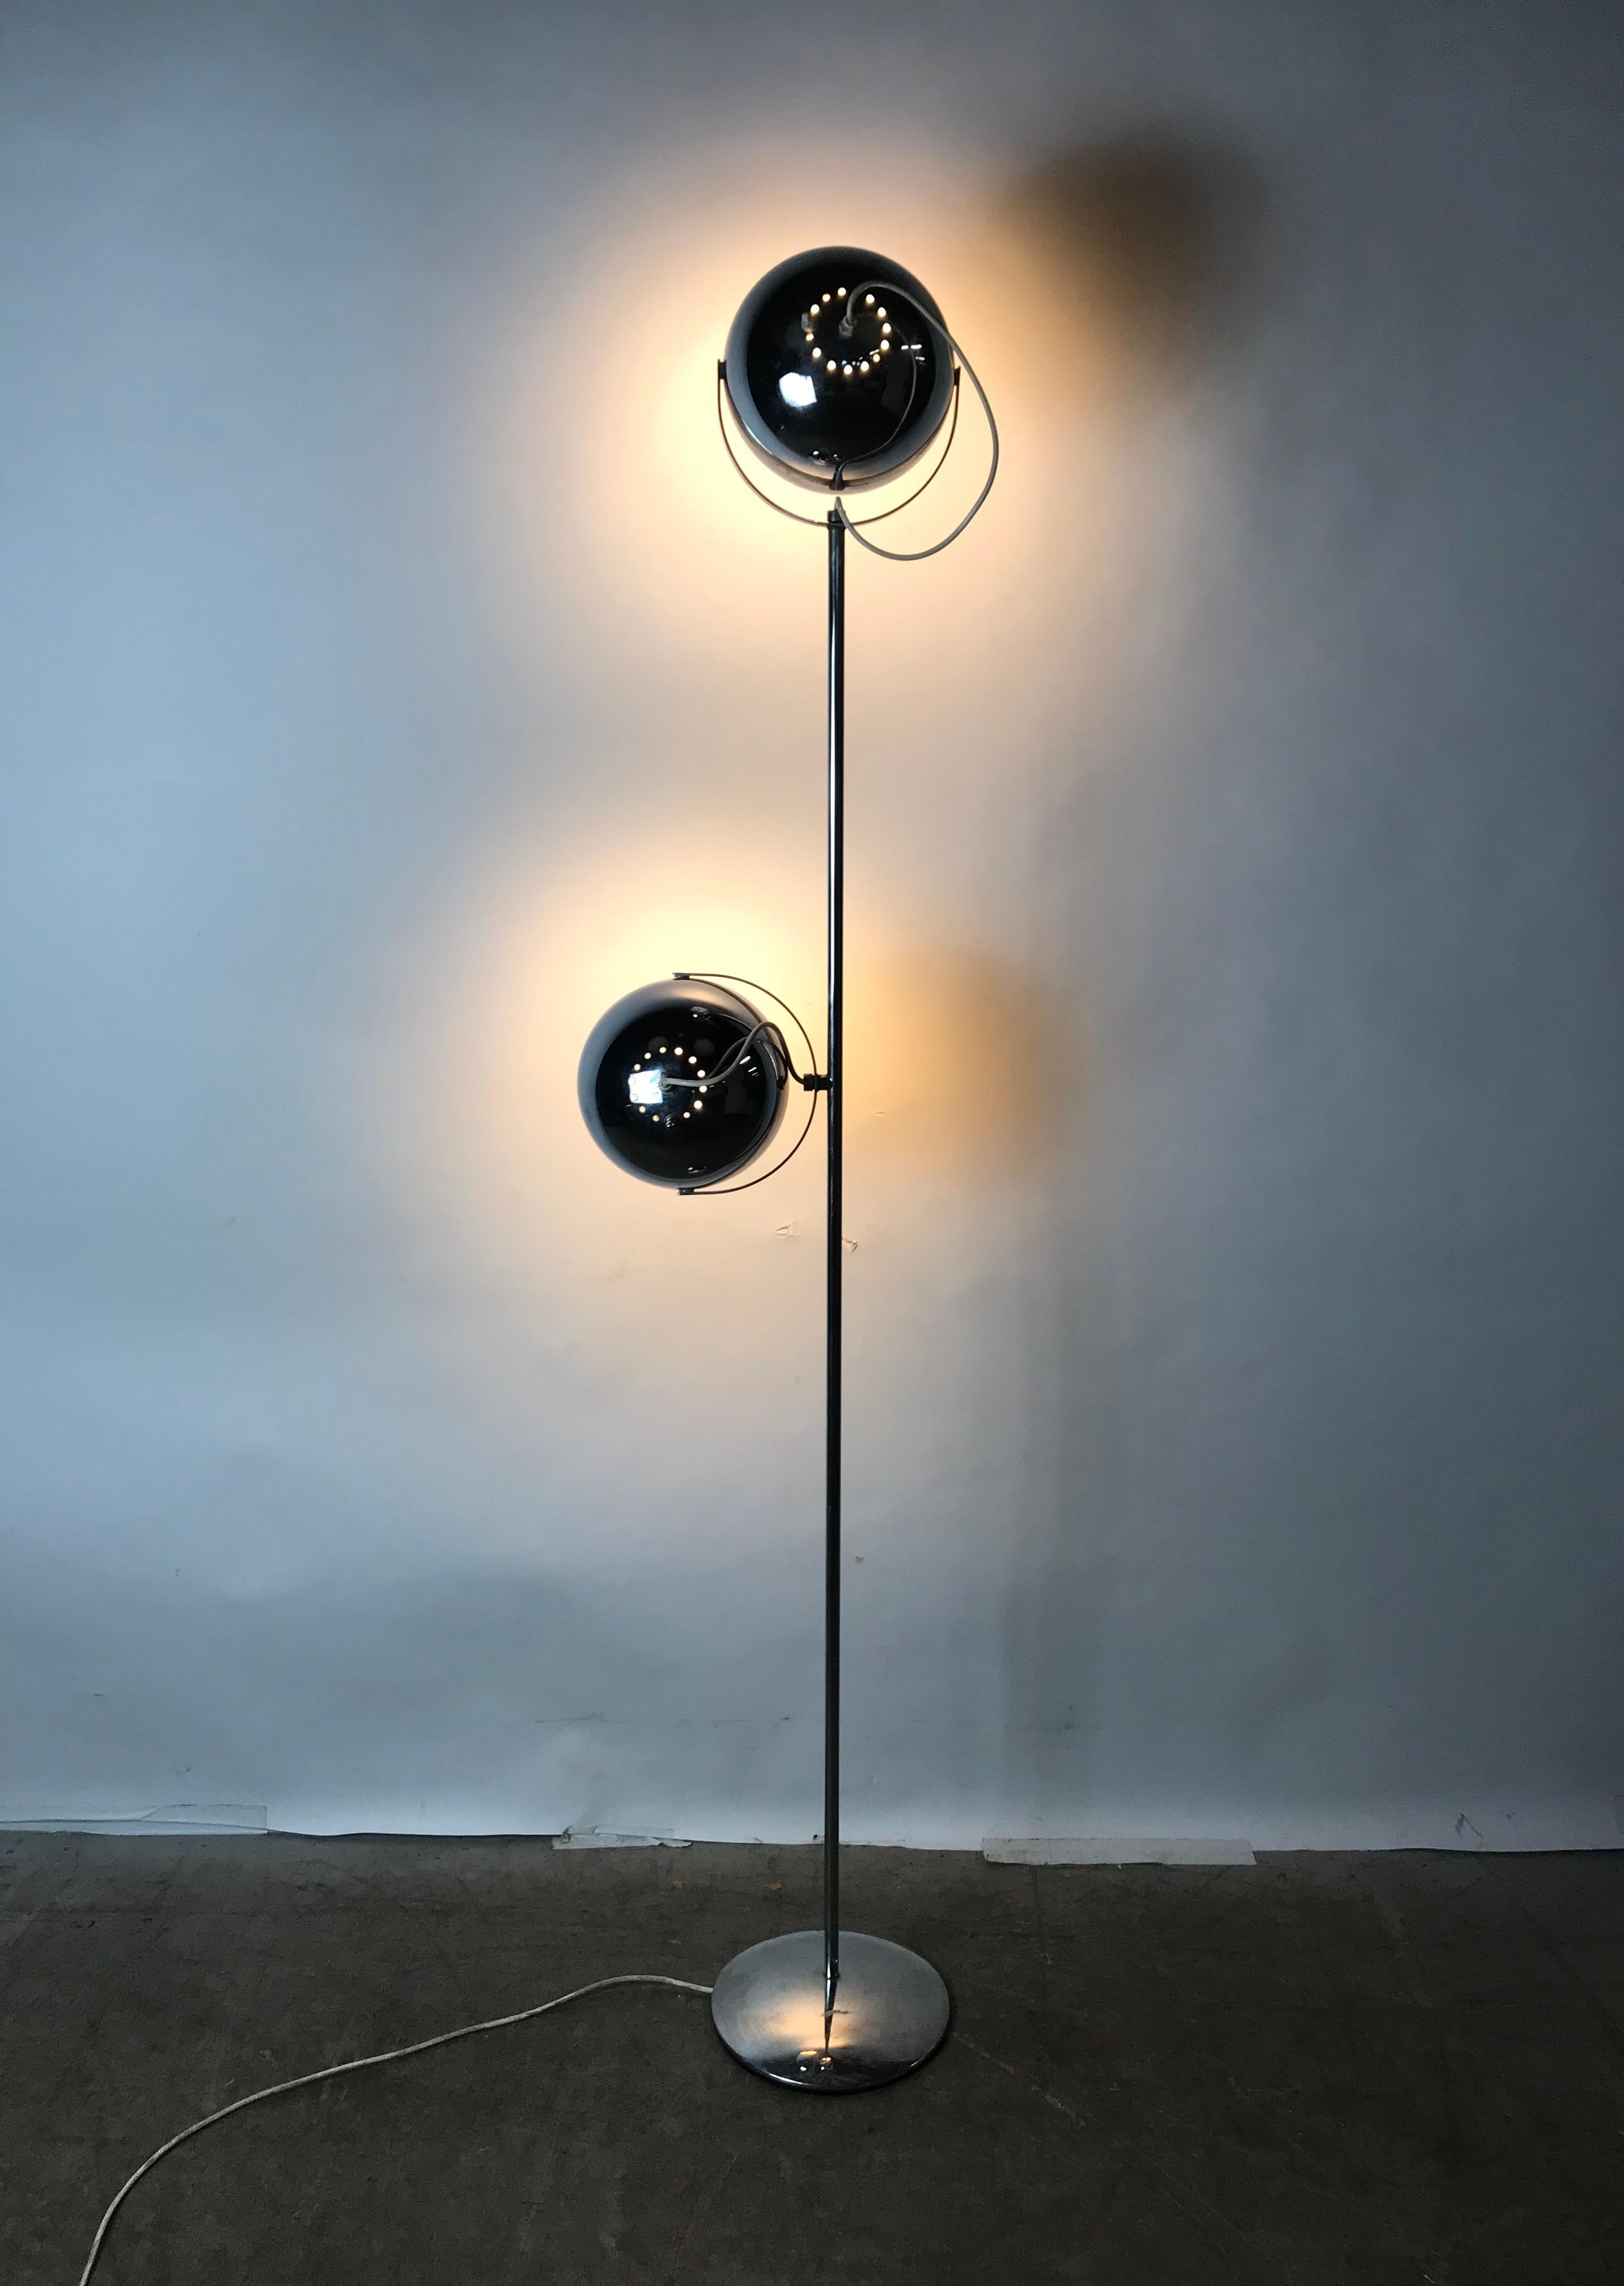 Classic 1960s Space Age floor lamp designed by Gofferdo Reggiani, solid, sturdy construction with a great attention to detail. Featuring two 8